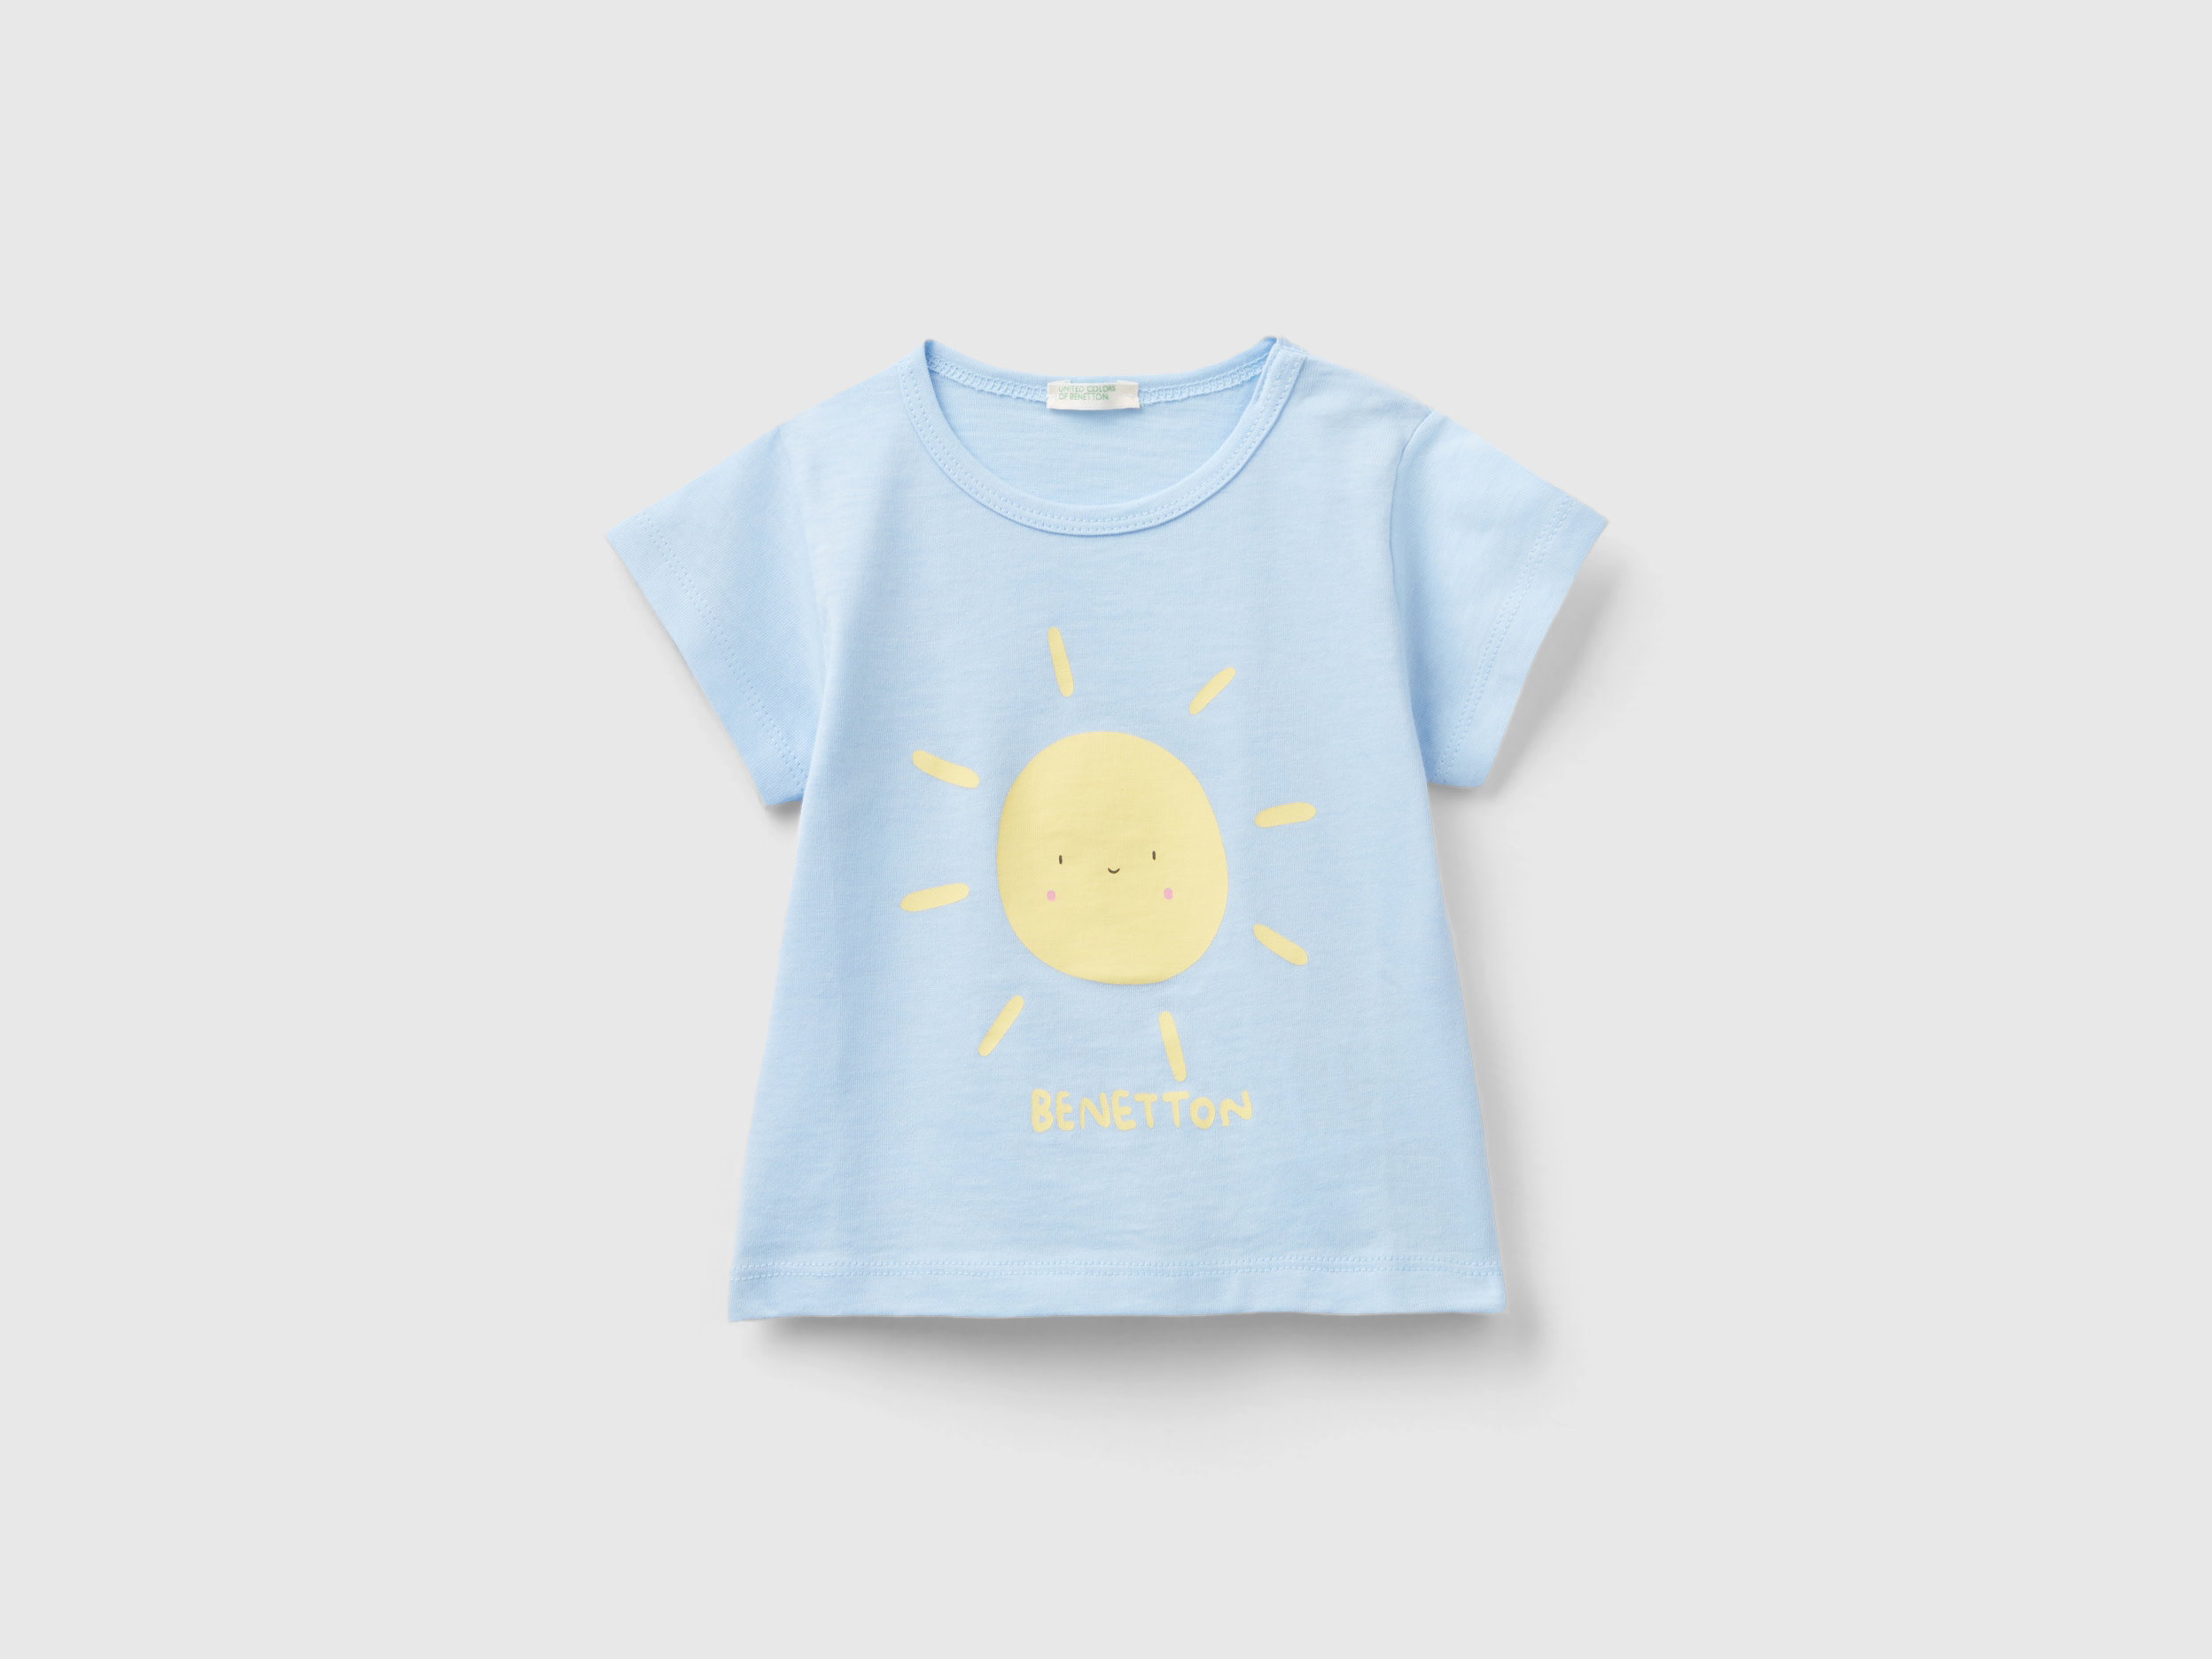 Image of Benetton, Organic Cotton T-shirt With Print, size 62, Sky Blue, Kids